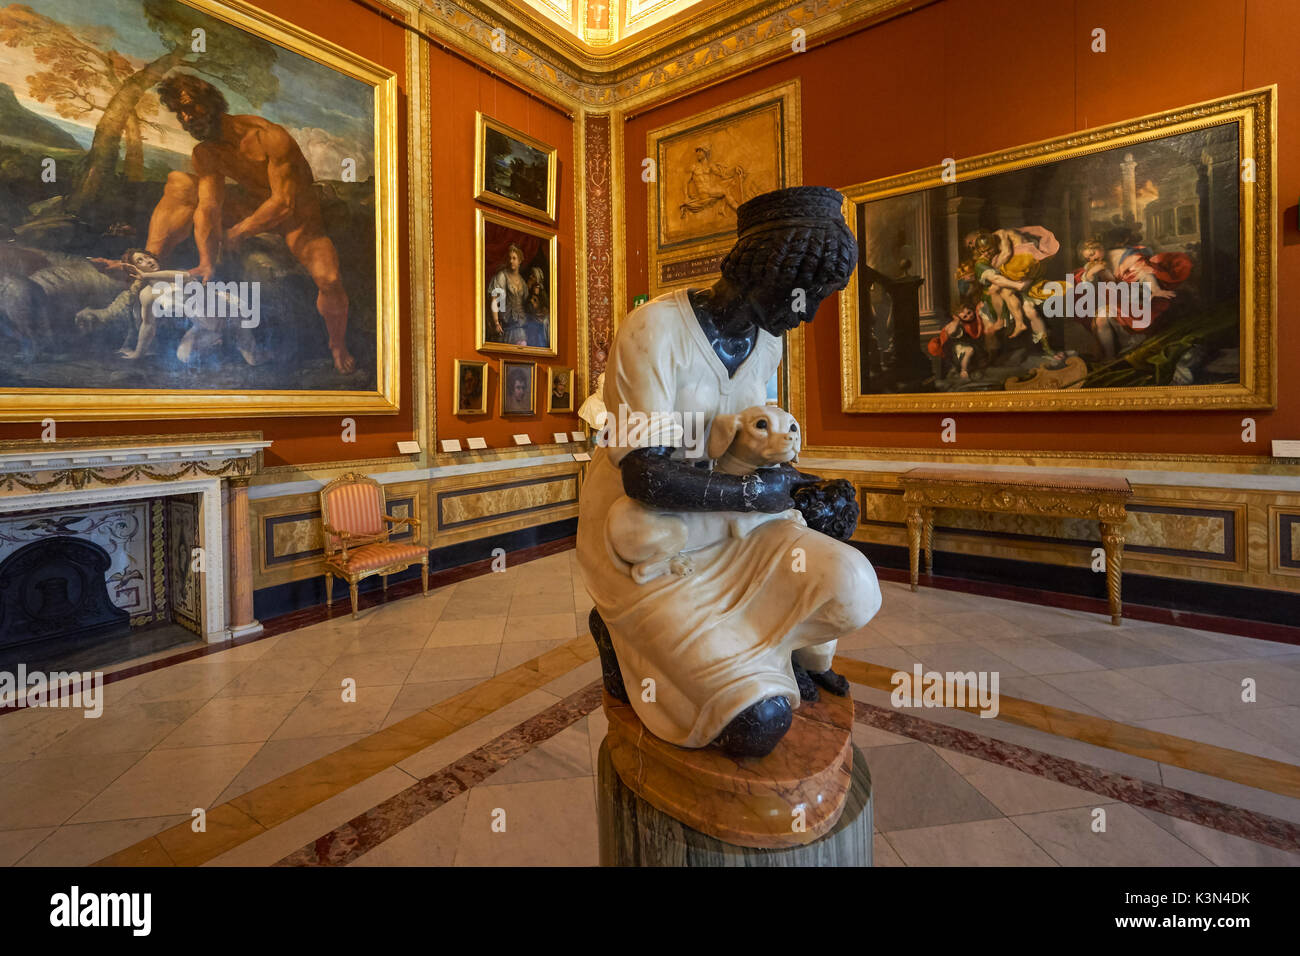 The Galleria Borghese in Rome, Italy Stock Photo